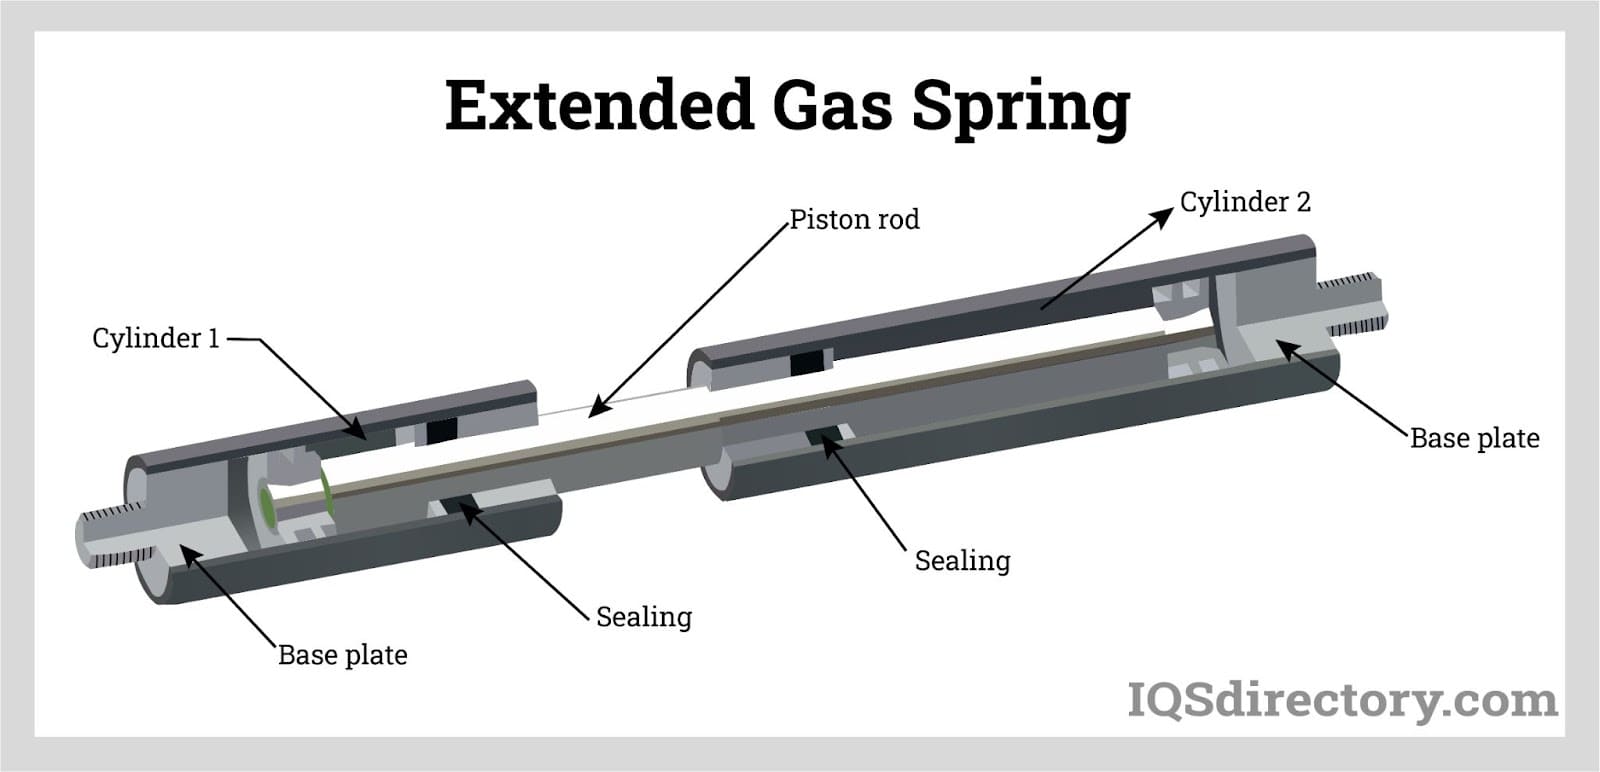 Extended Gas Spring